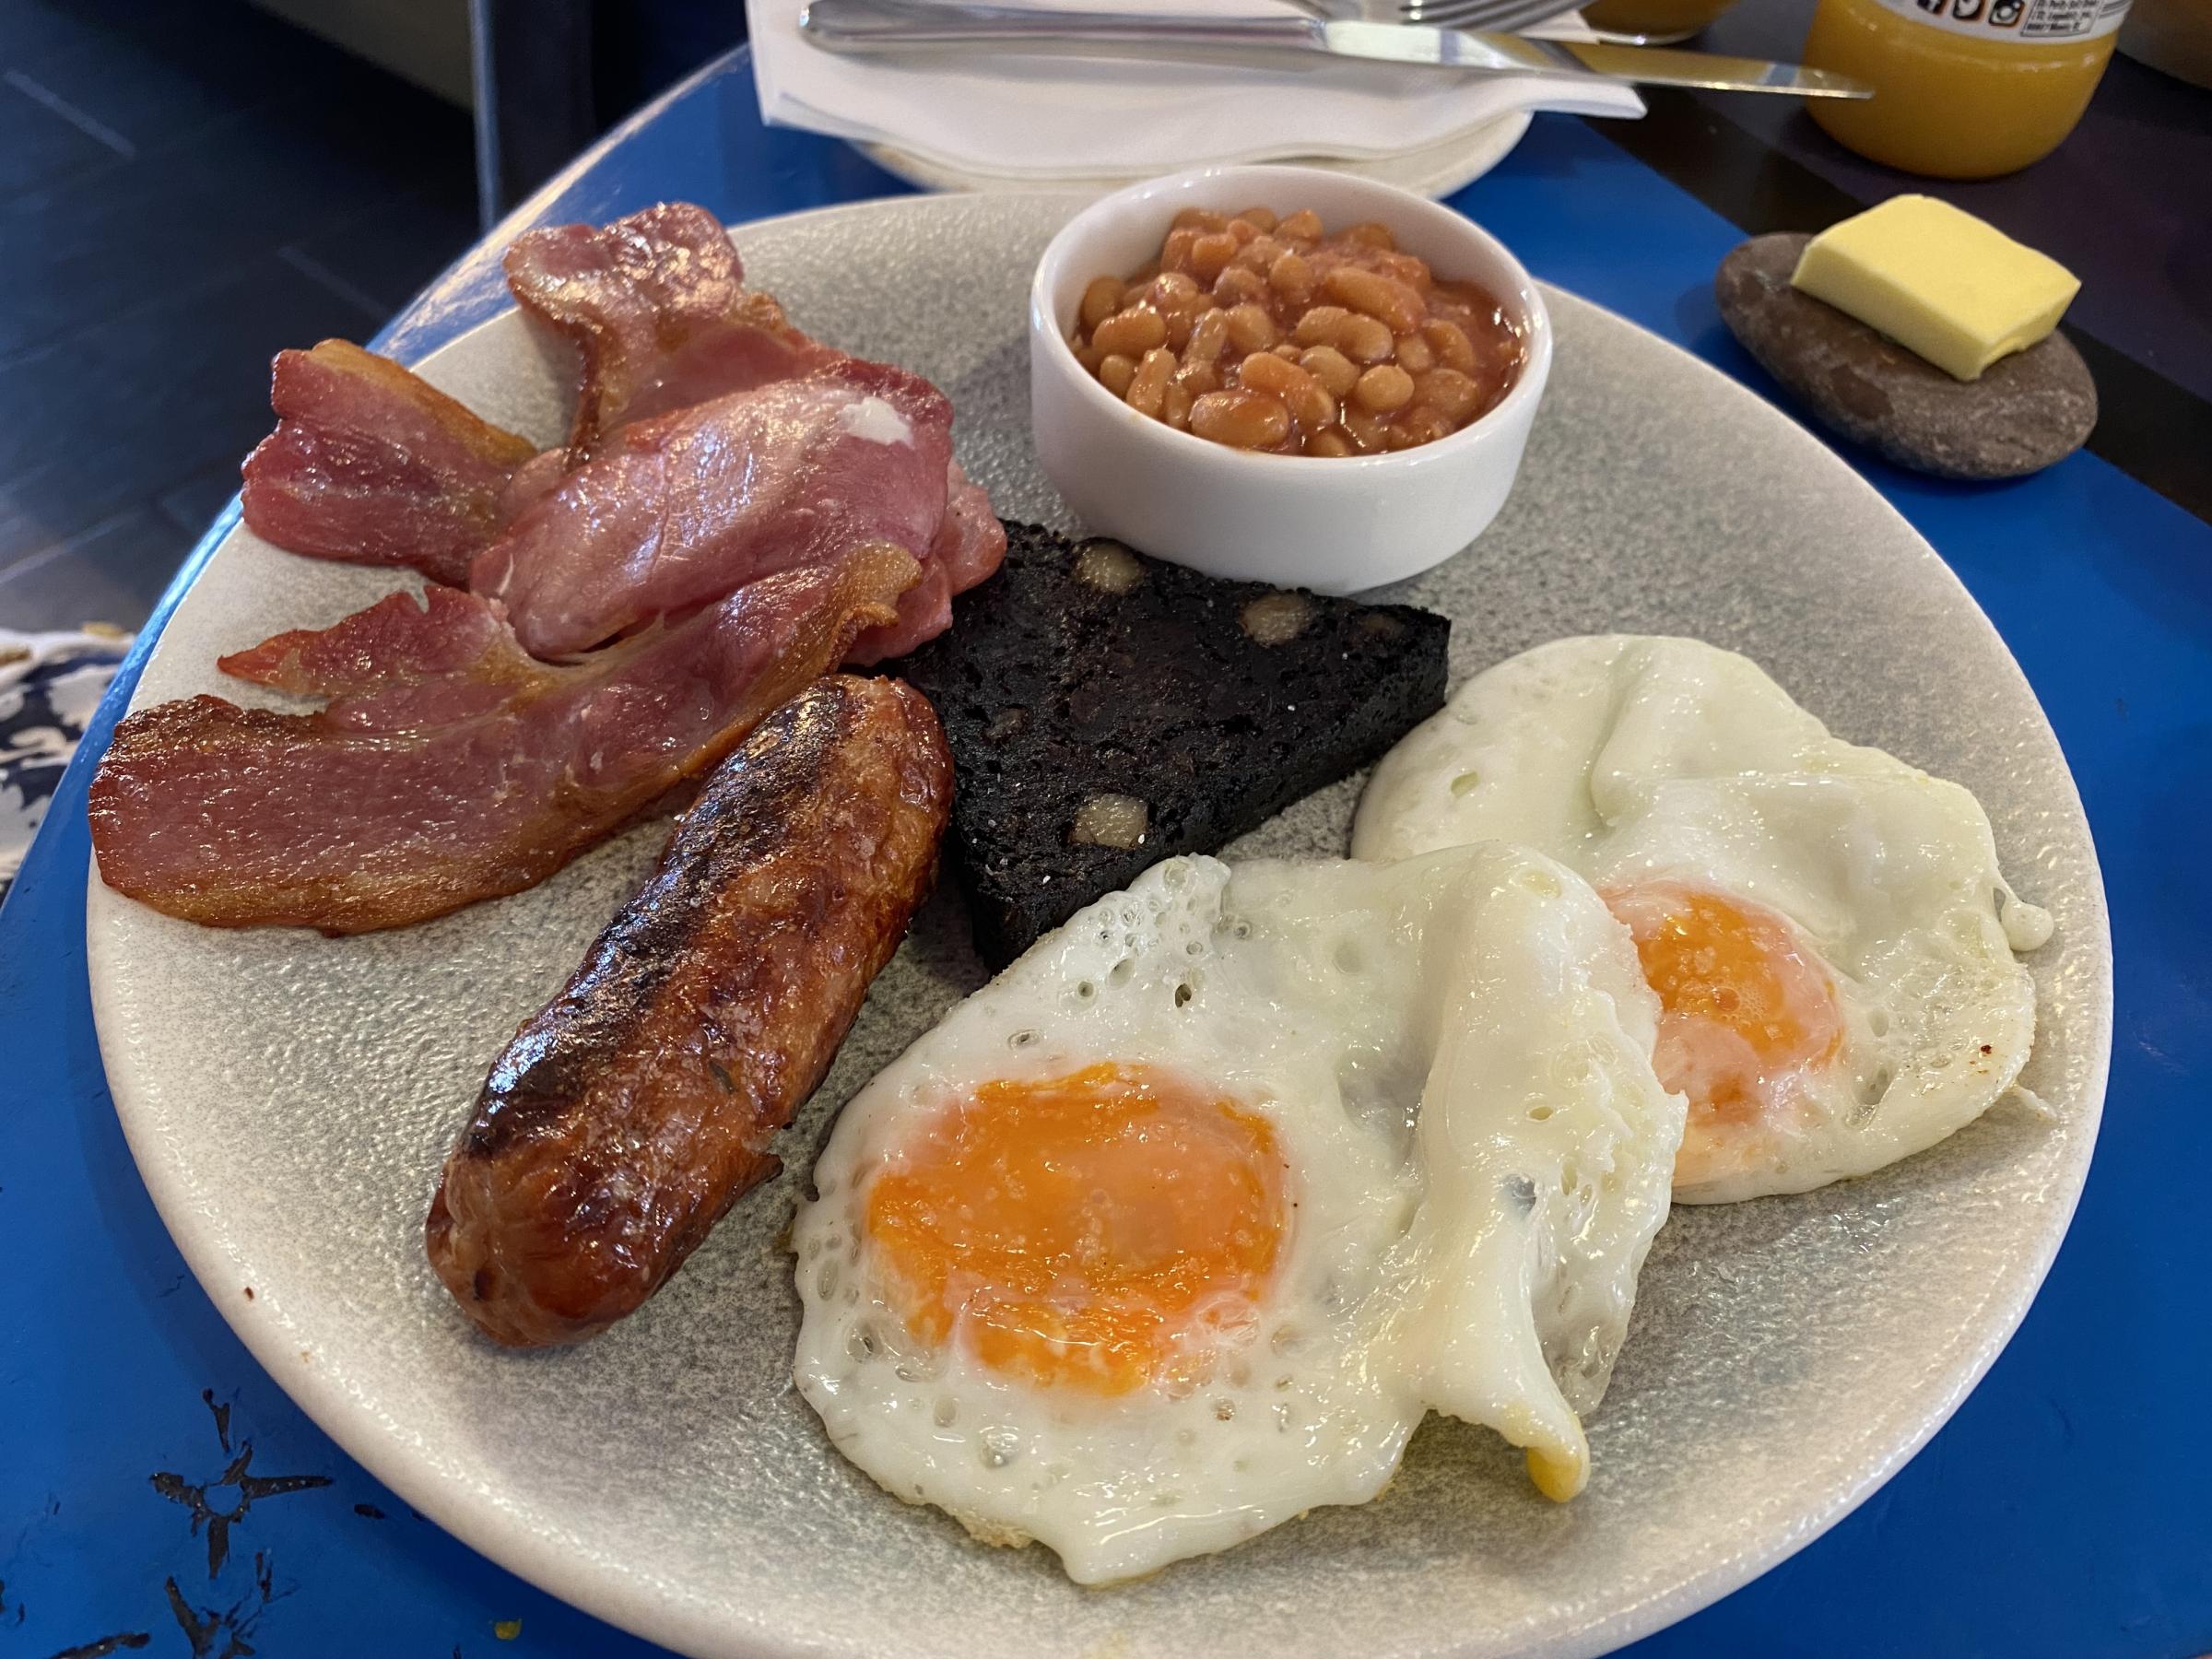 The full breakfast at 1Twenty7 Café and Open Kitchen